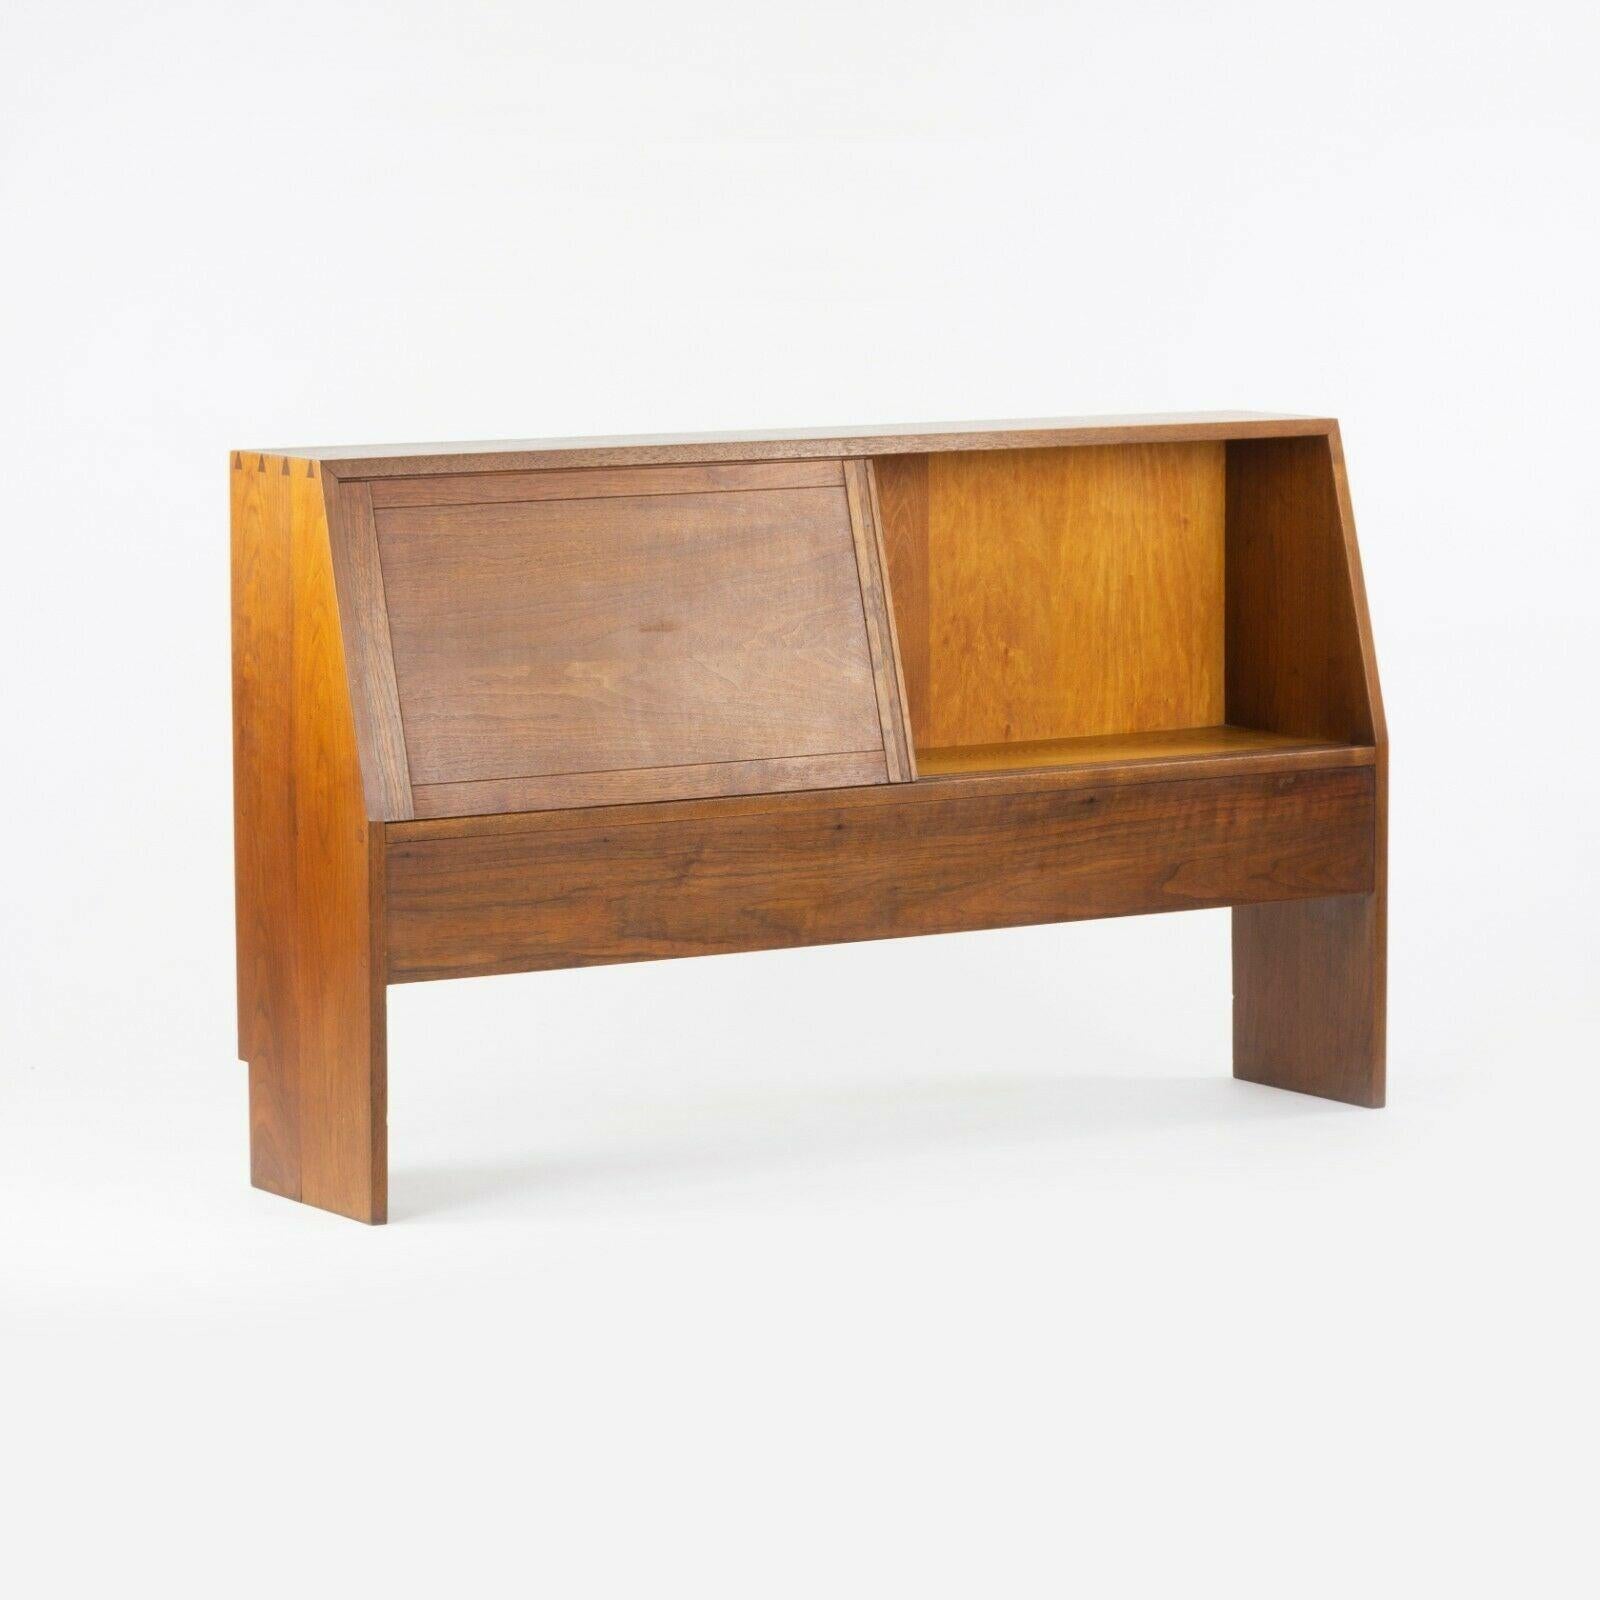 Listed for sale is a very special 1950s George Nakashima headboard, produced at the Nakashima Woodworking studio in New Hope, Pennsylvania. This stunning original example is the variant with a storage compartment and its constructed in solid black